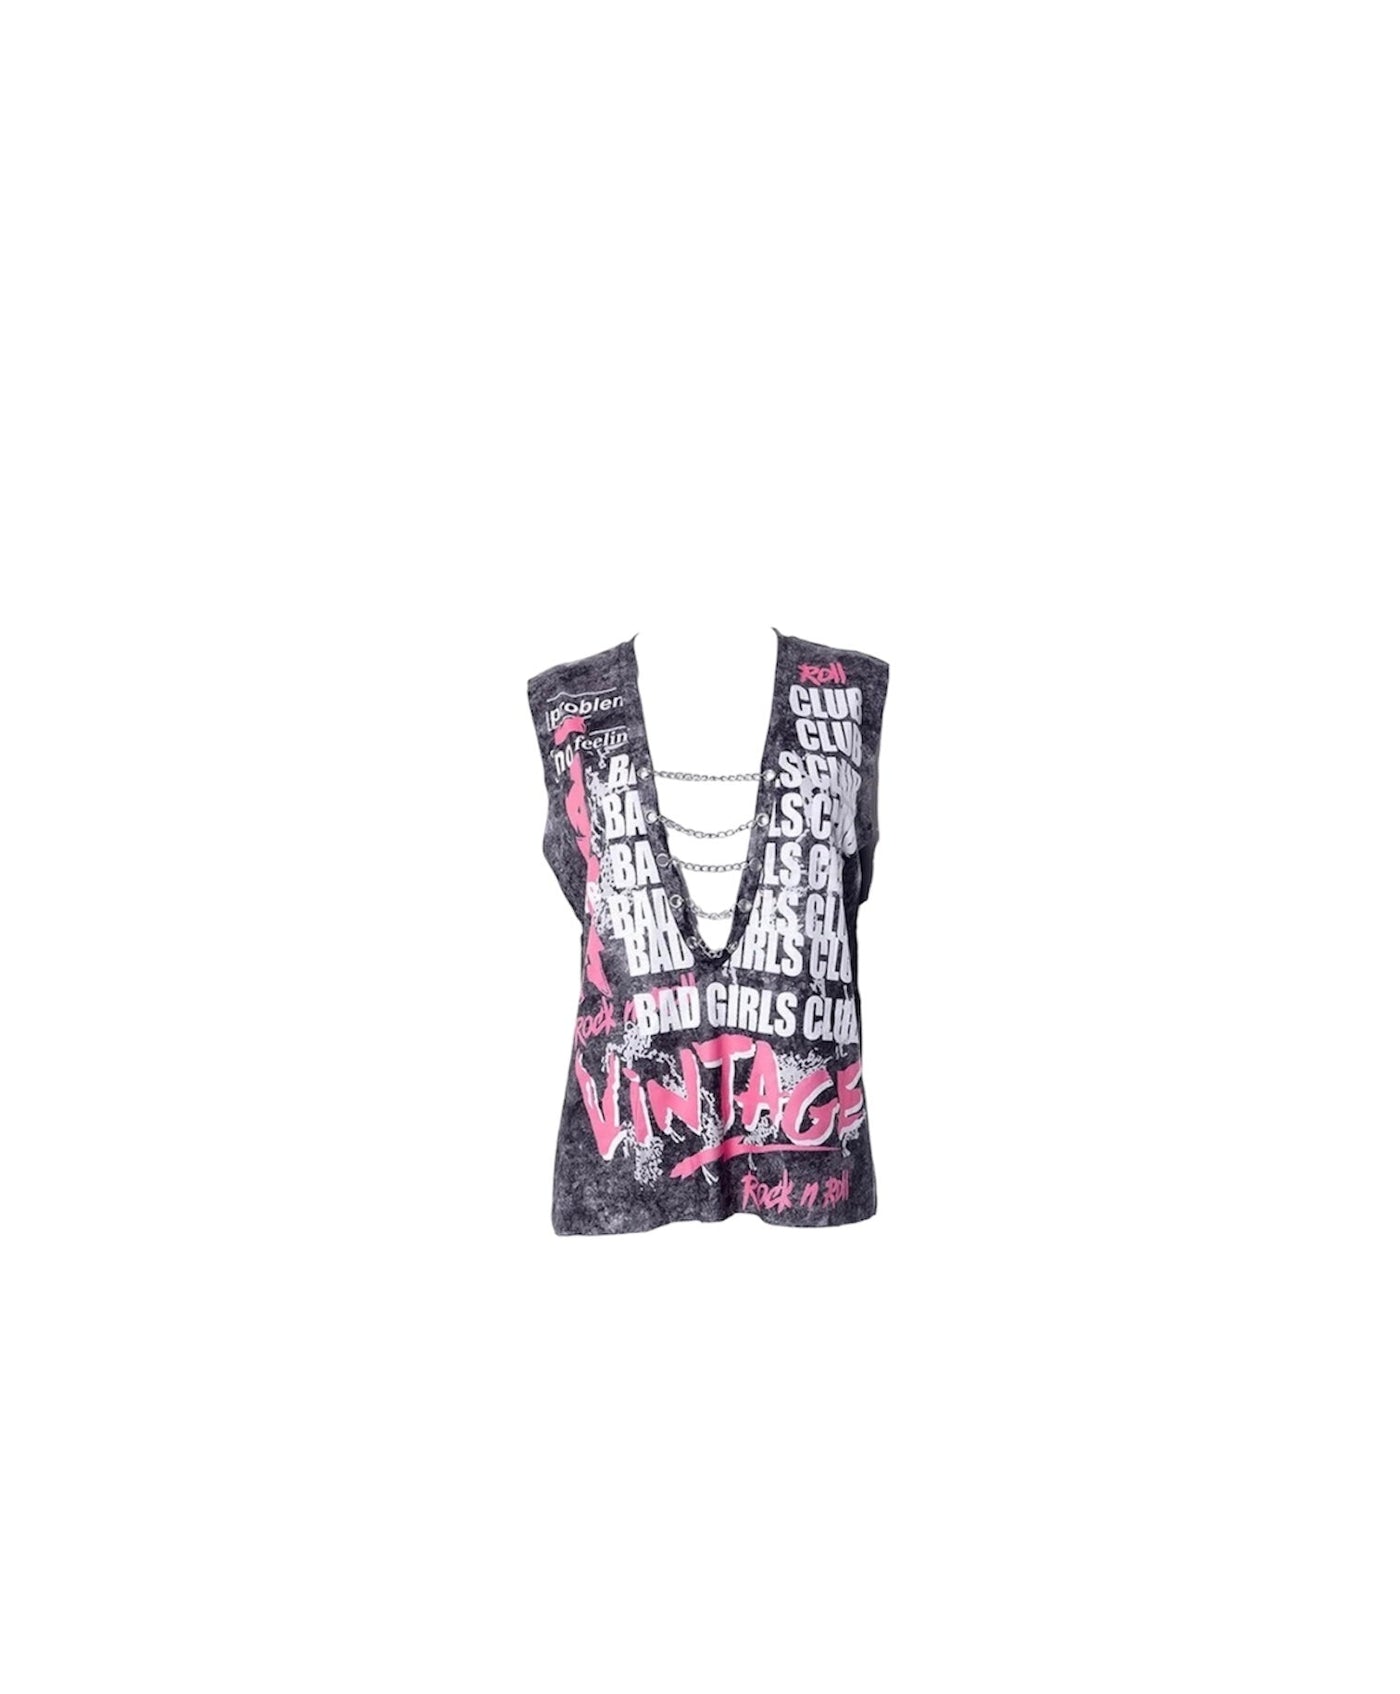 Bad Girls Club Sleeveless Top - Dezired Beauty Boutique